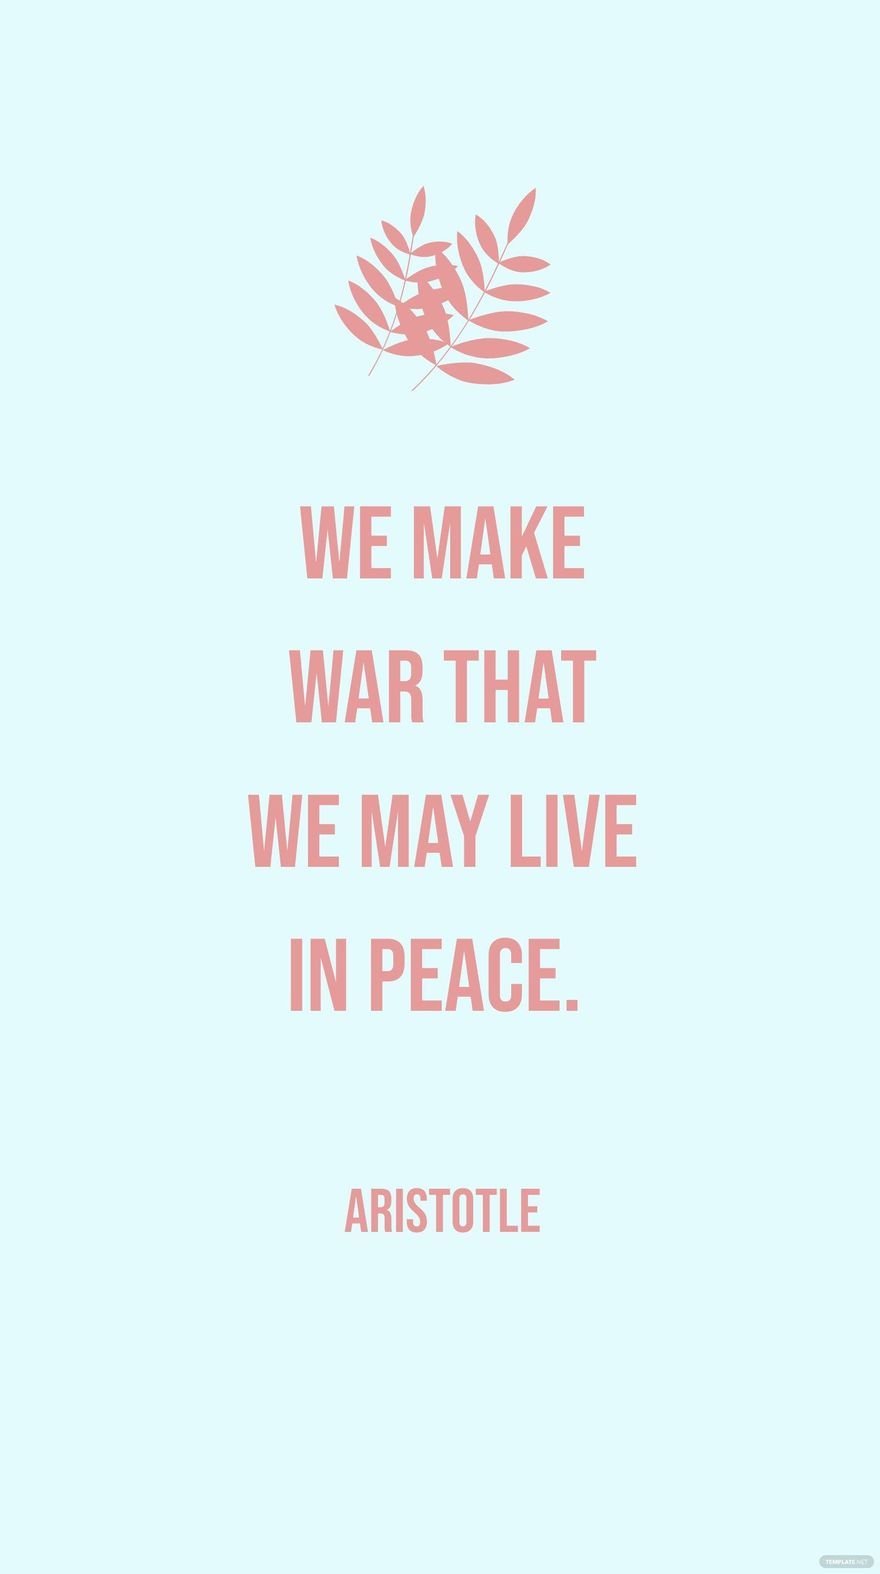 Aristotle - We make war that we may live in peace.